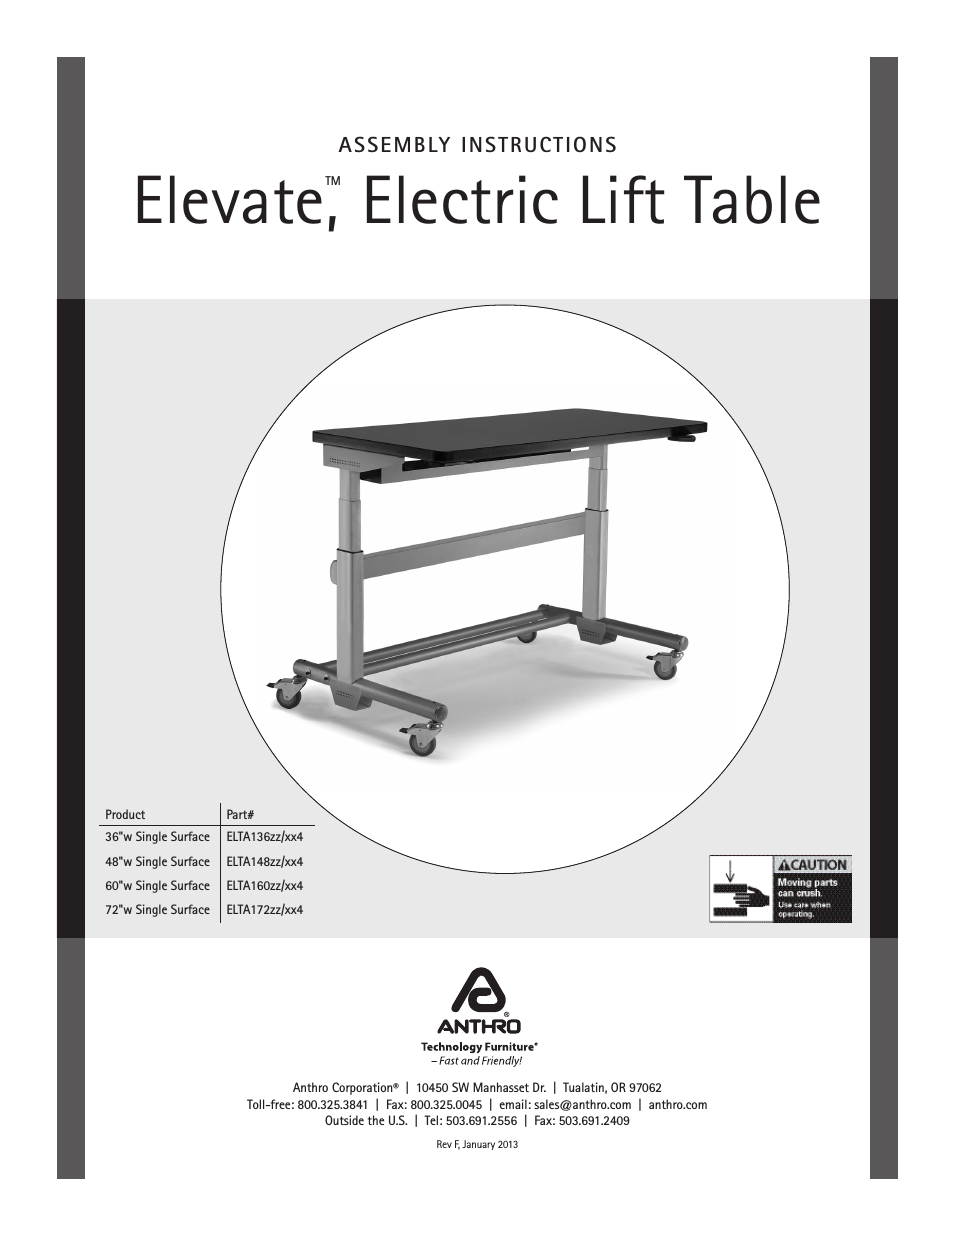 Elevate Original Single Surface Assembly Instructions